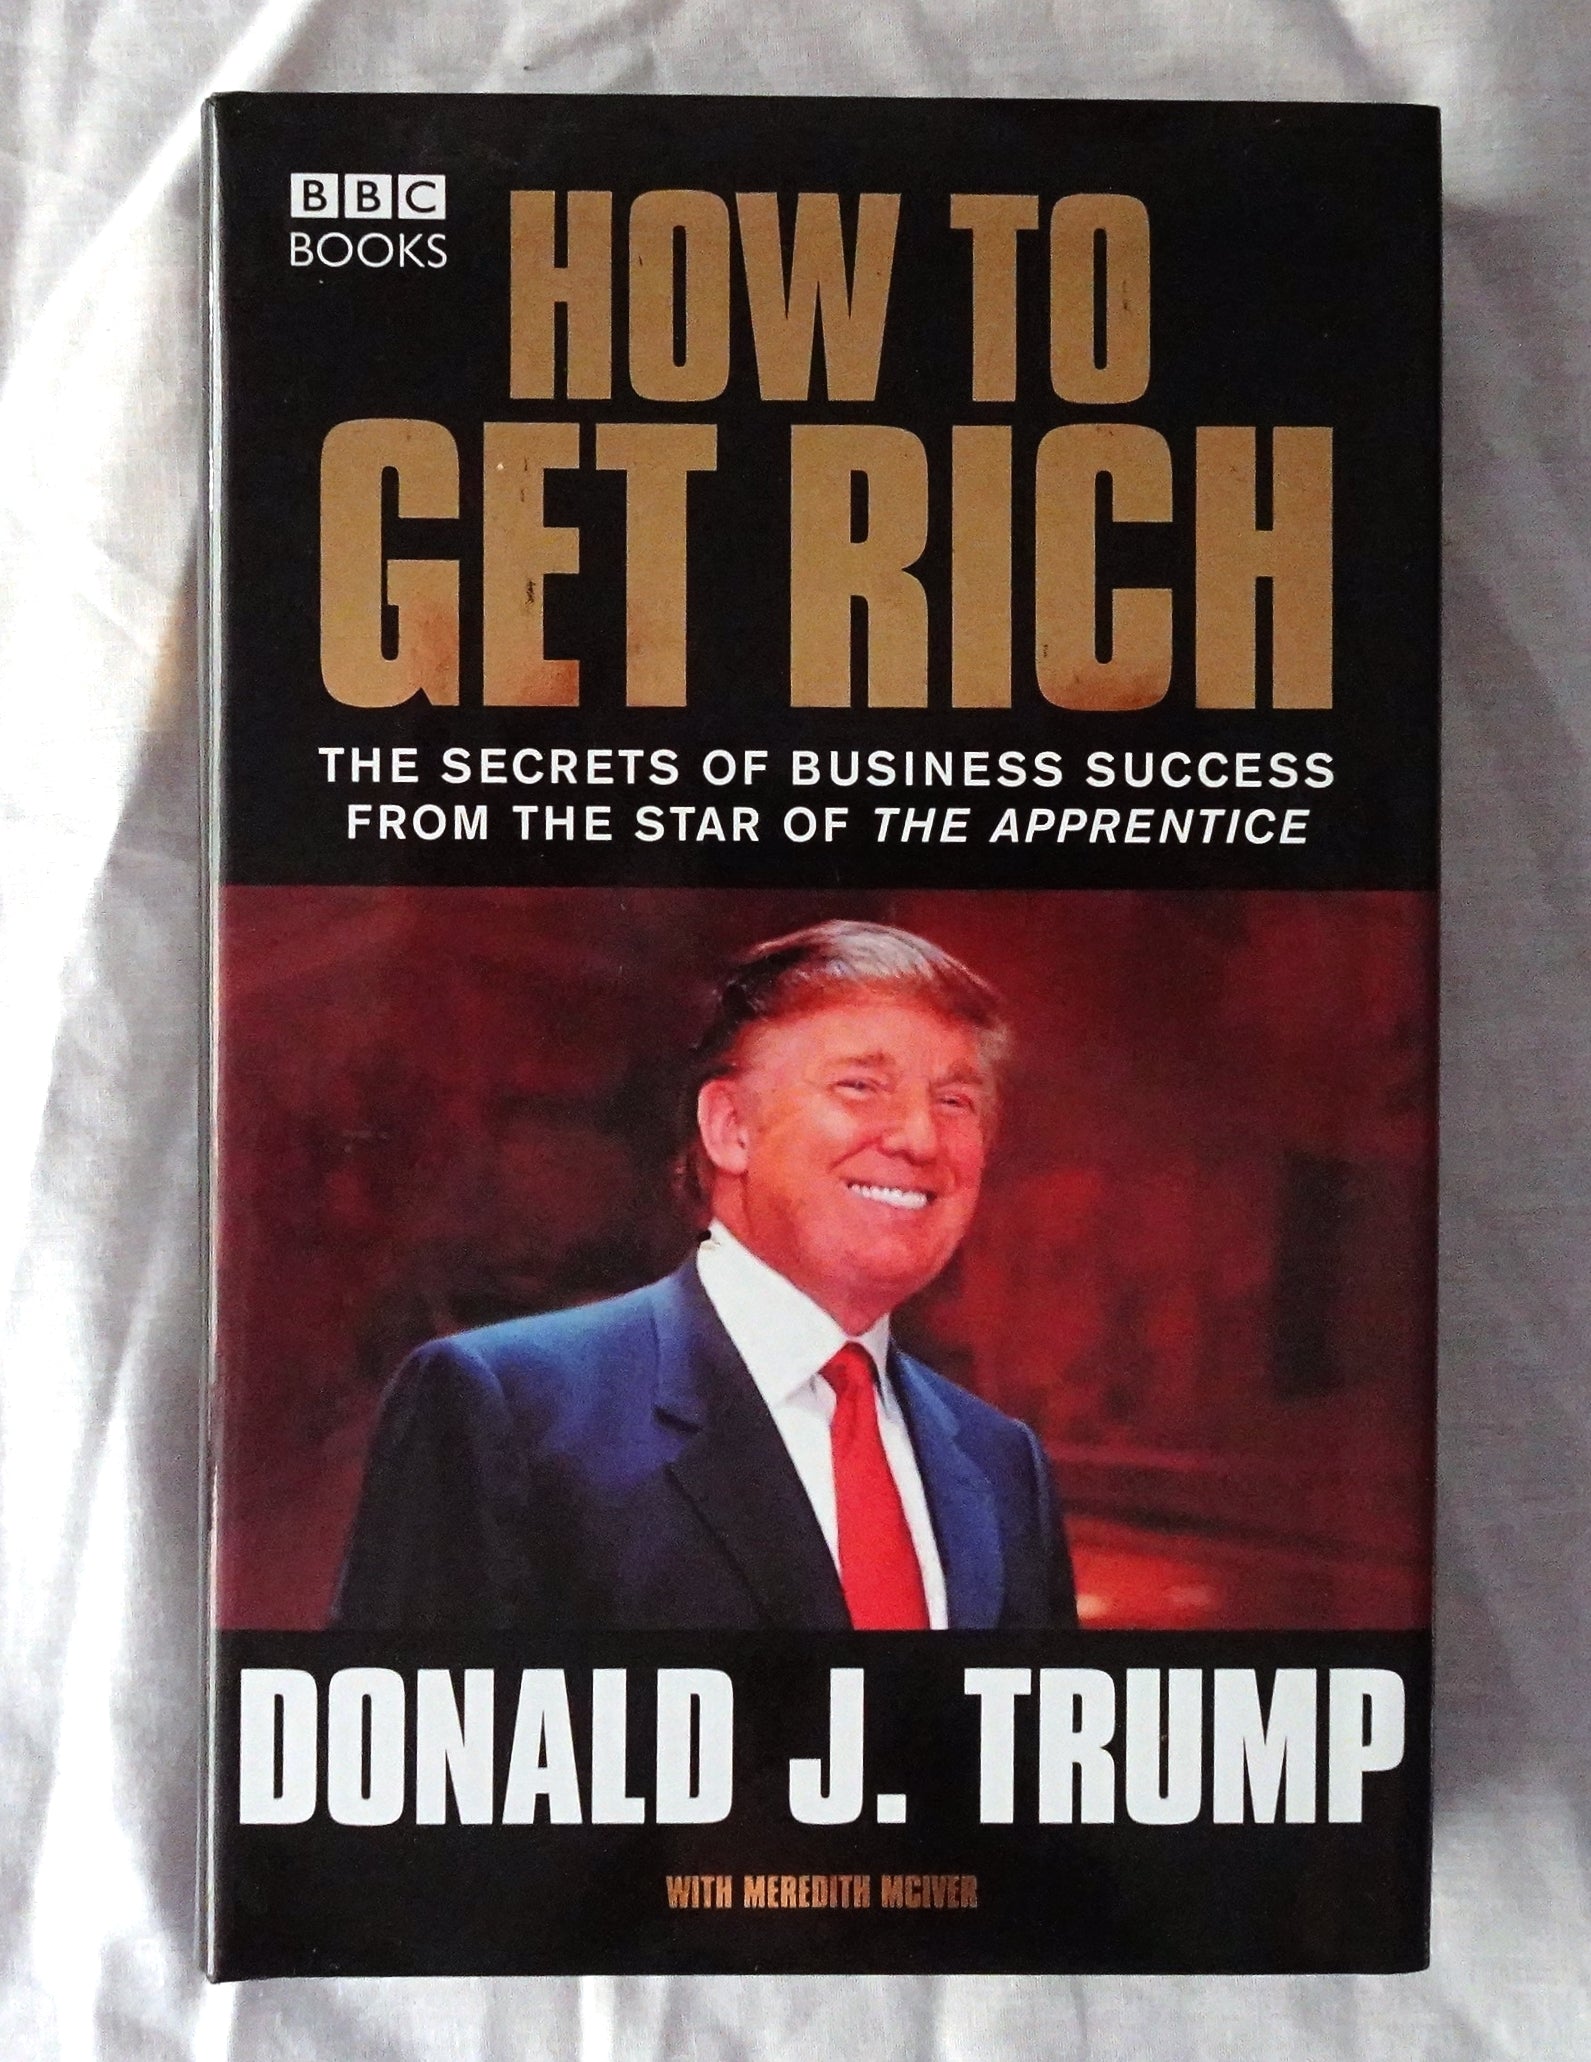 How to Get Rich  The Secret of Business Success from the Star of The Apprentice  by Donald J. Trump